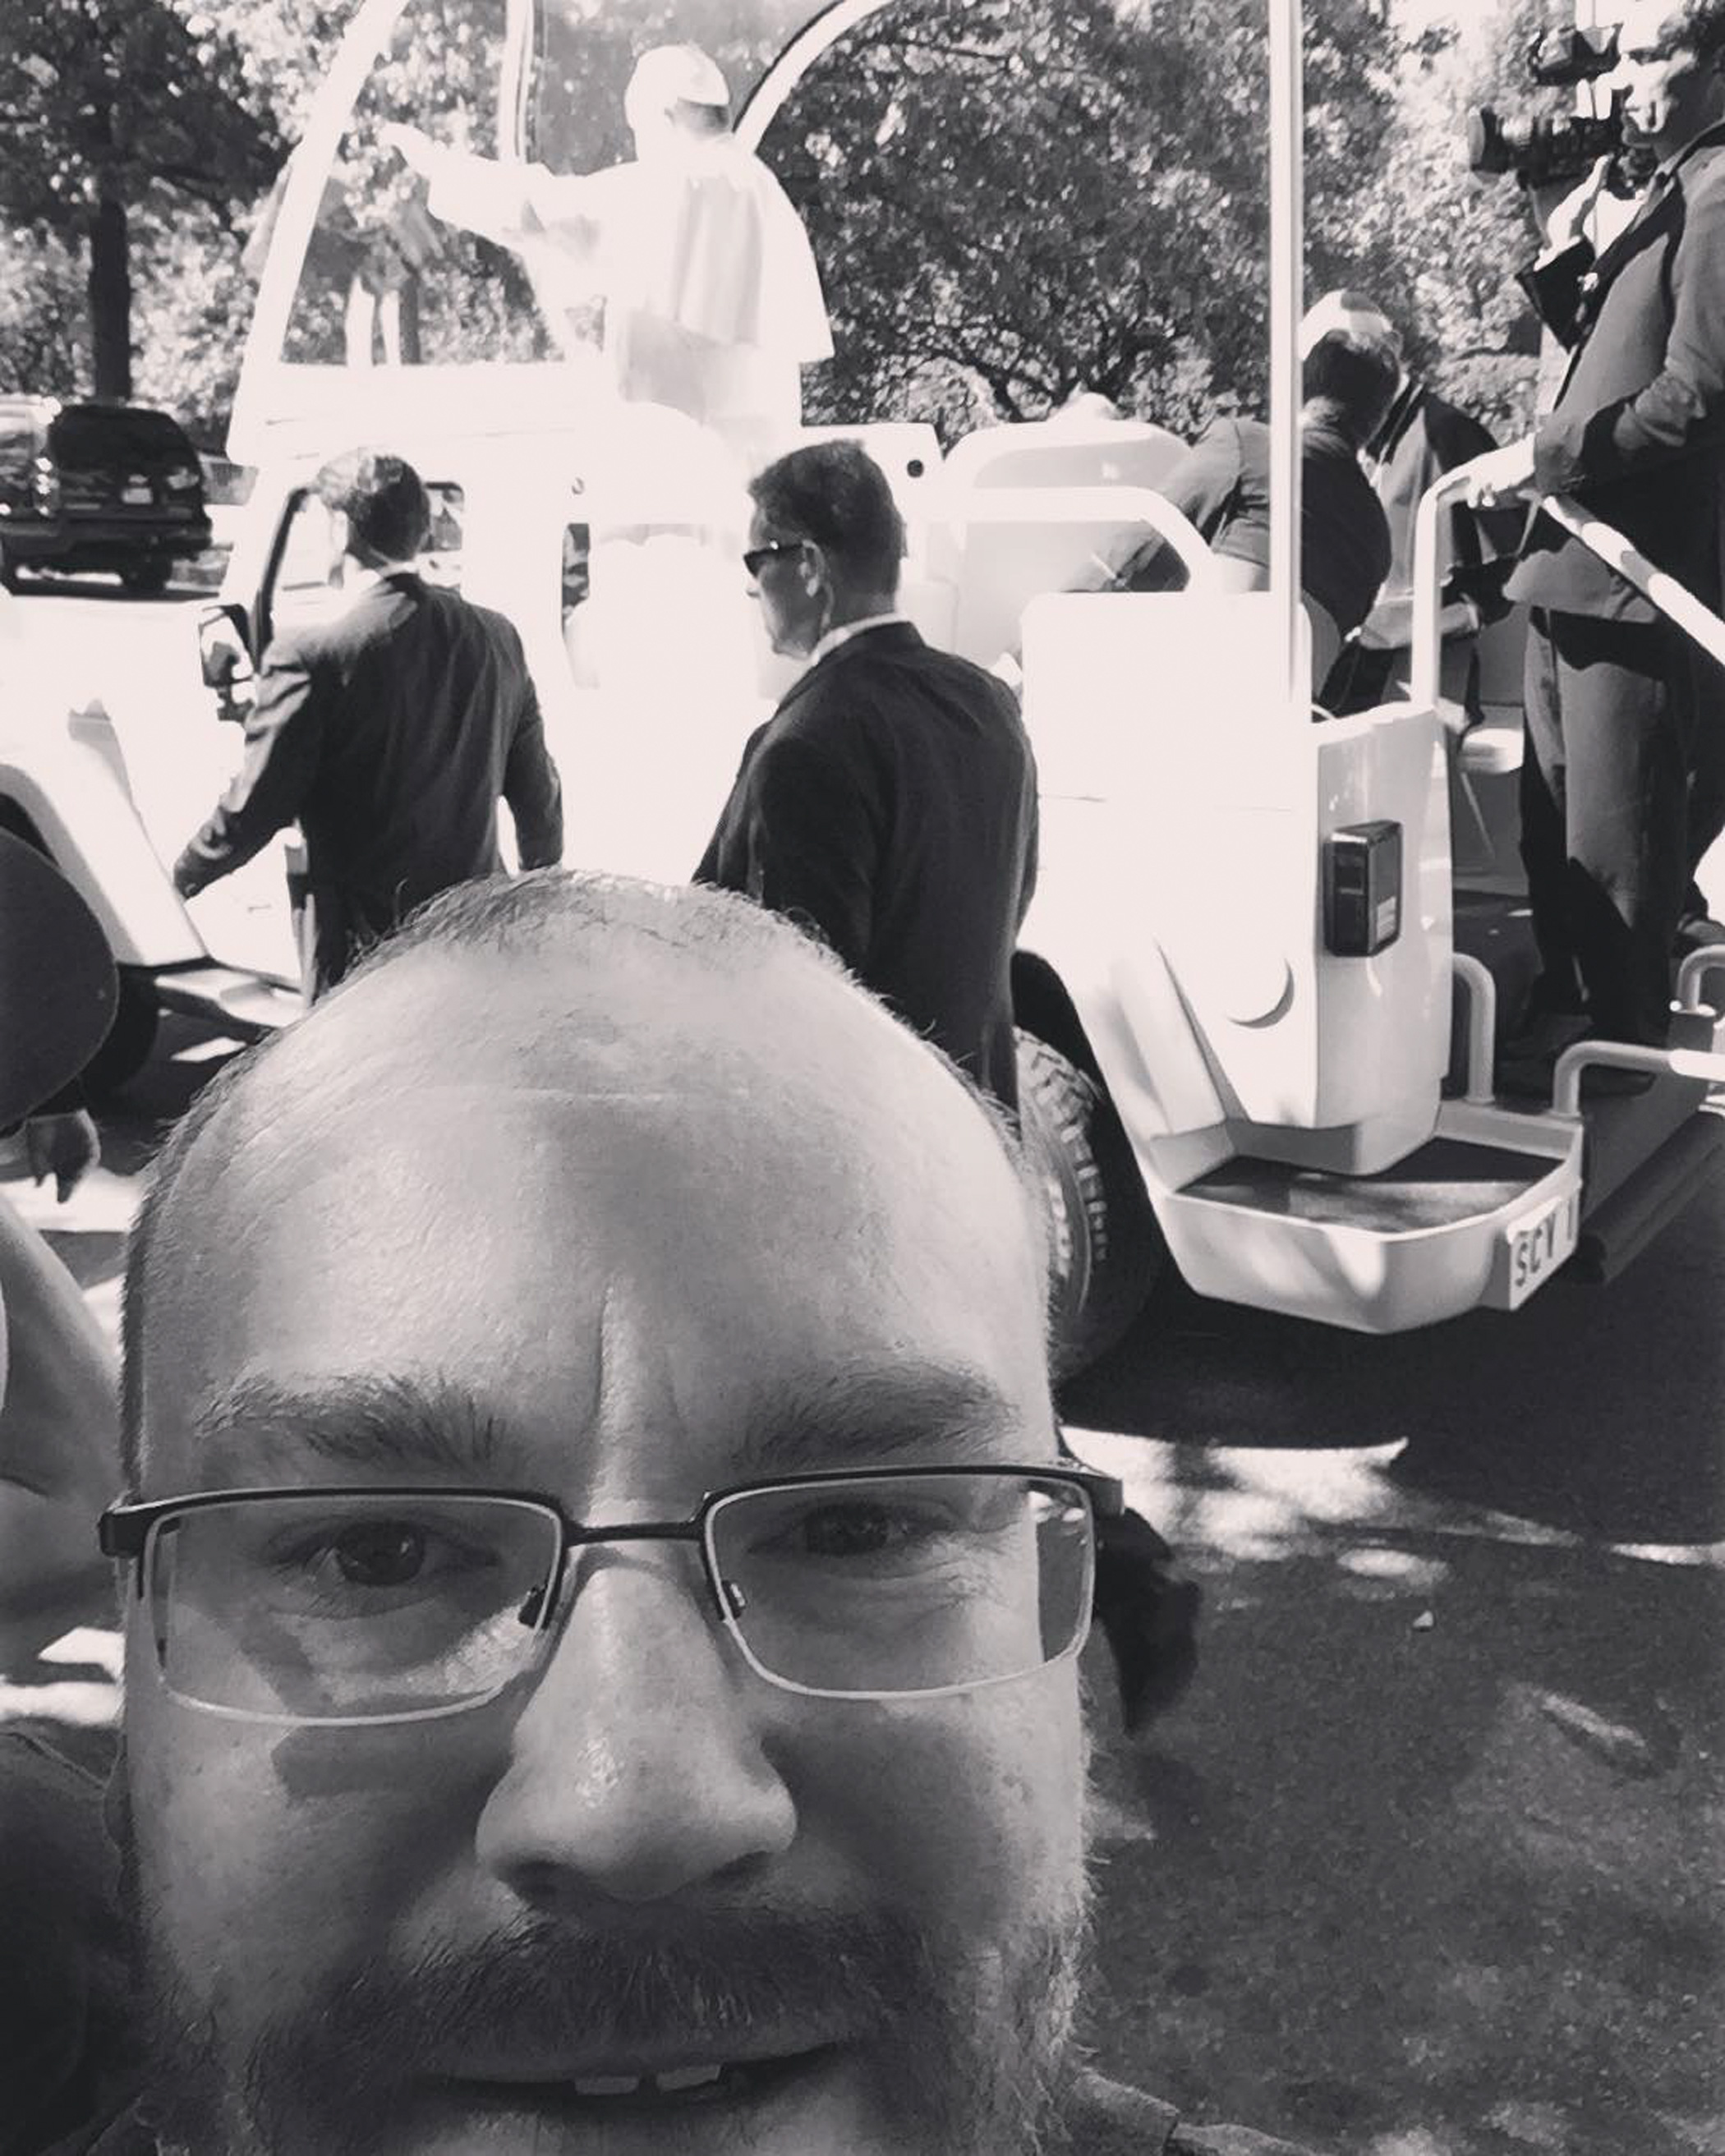 James Akers Jr. posted from Washington, D.C.:   Technically a #popeselfie